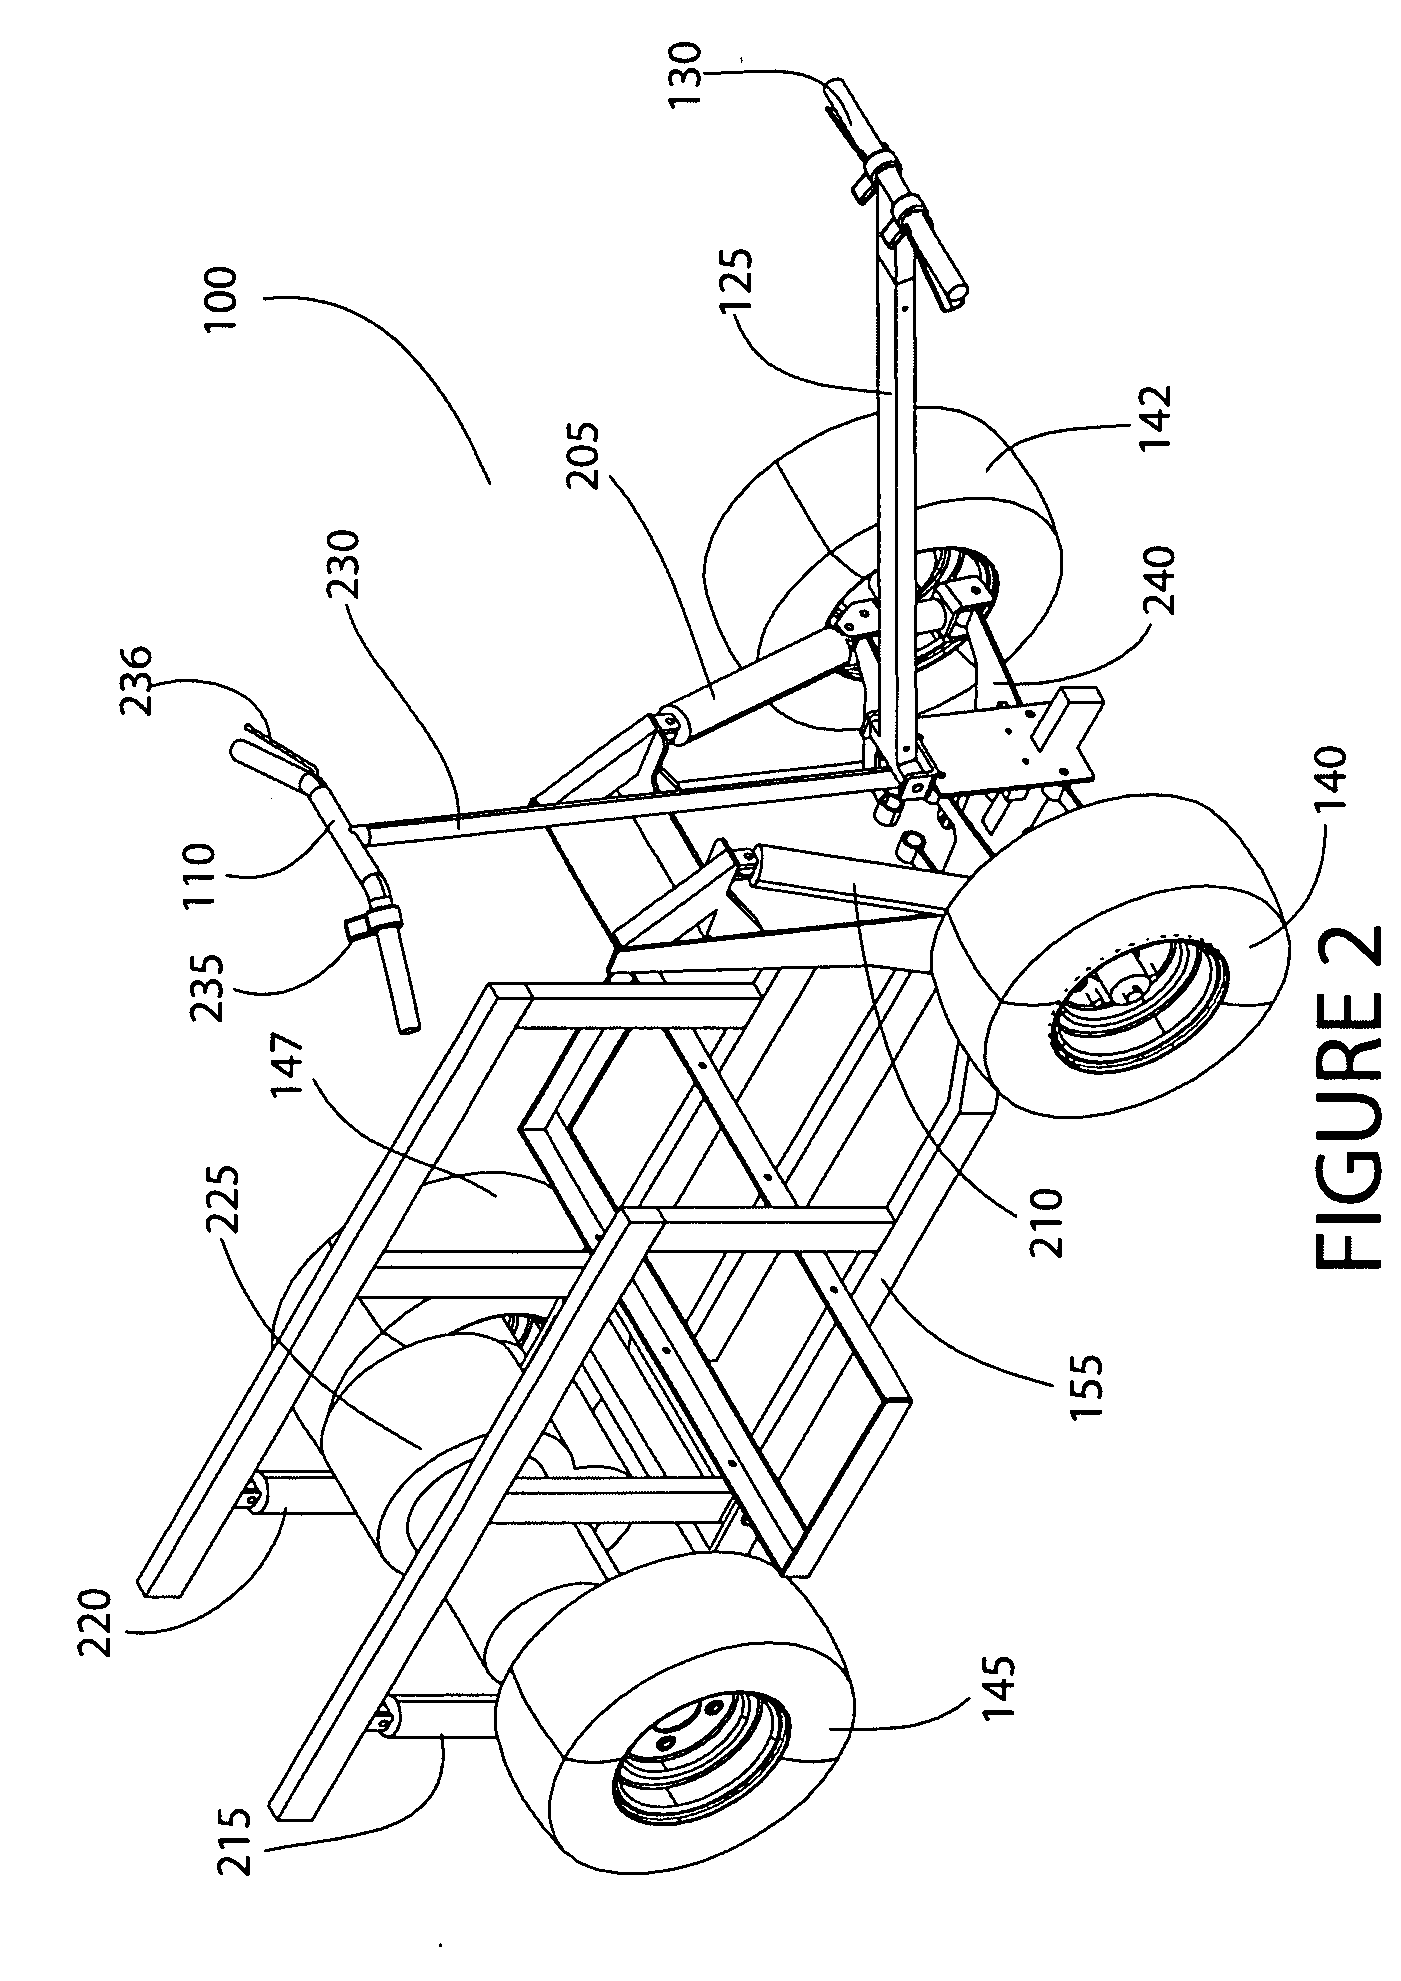 Transportation cart with electronic controls, steering and brakes selectively configured for riding and walking modes of use